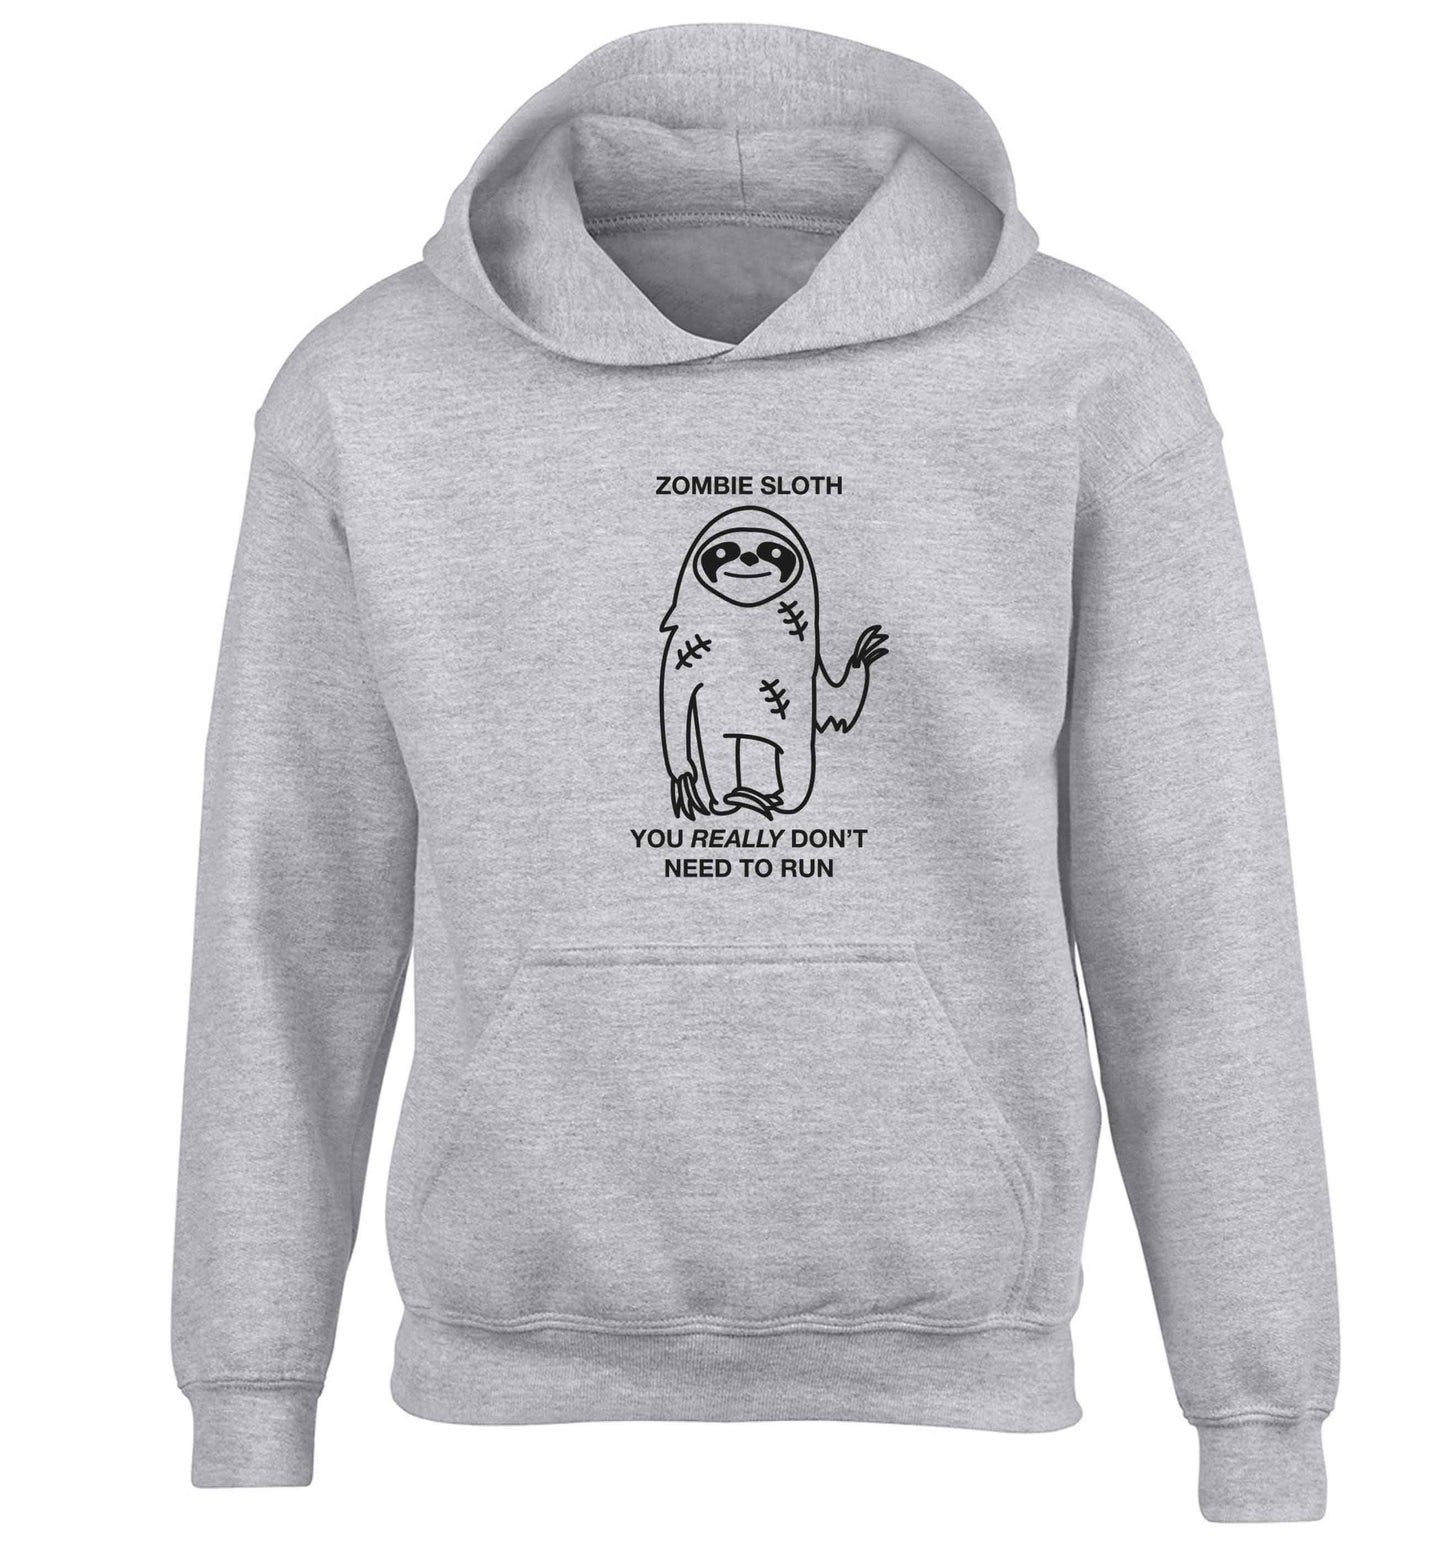 Zombie sloth you really don't need to run children's grey hoodie 12-13 Years